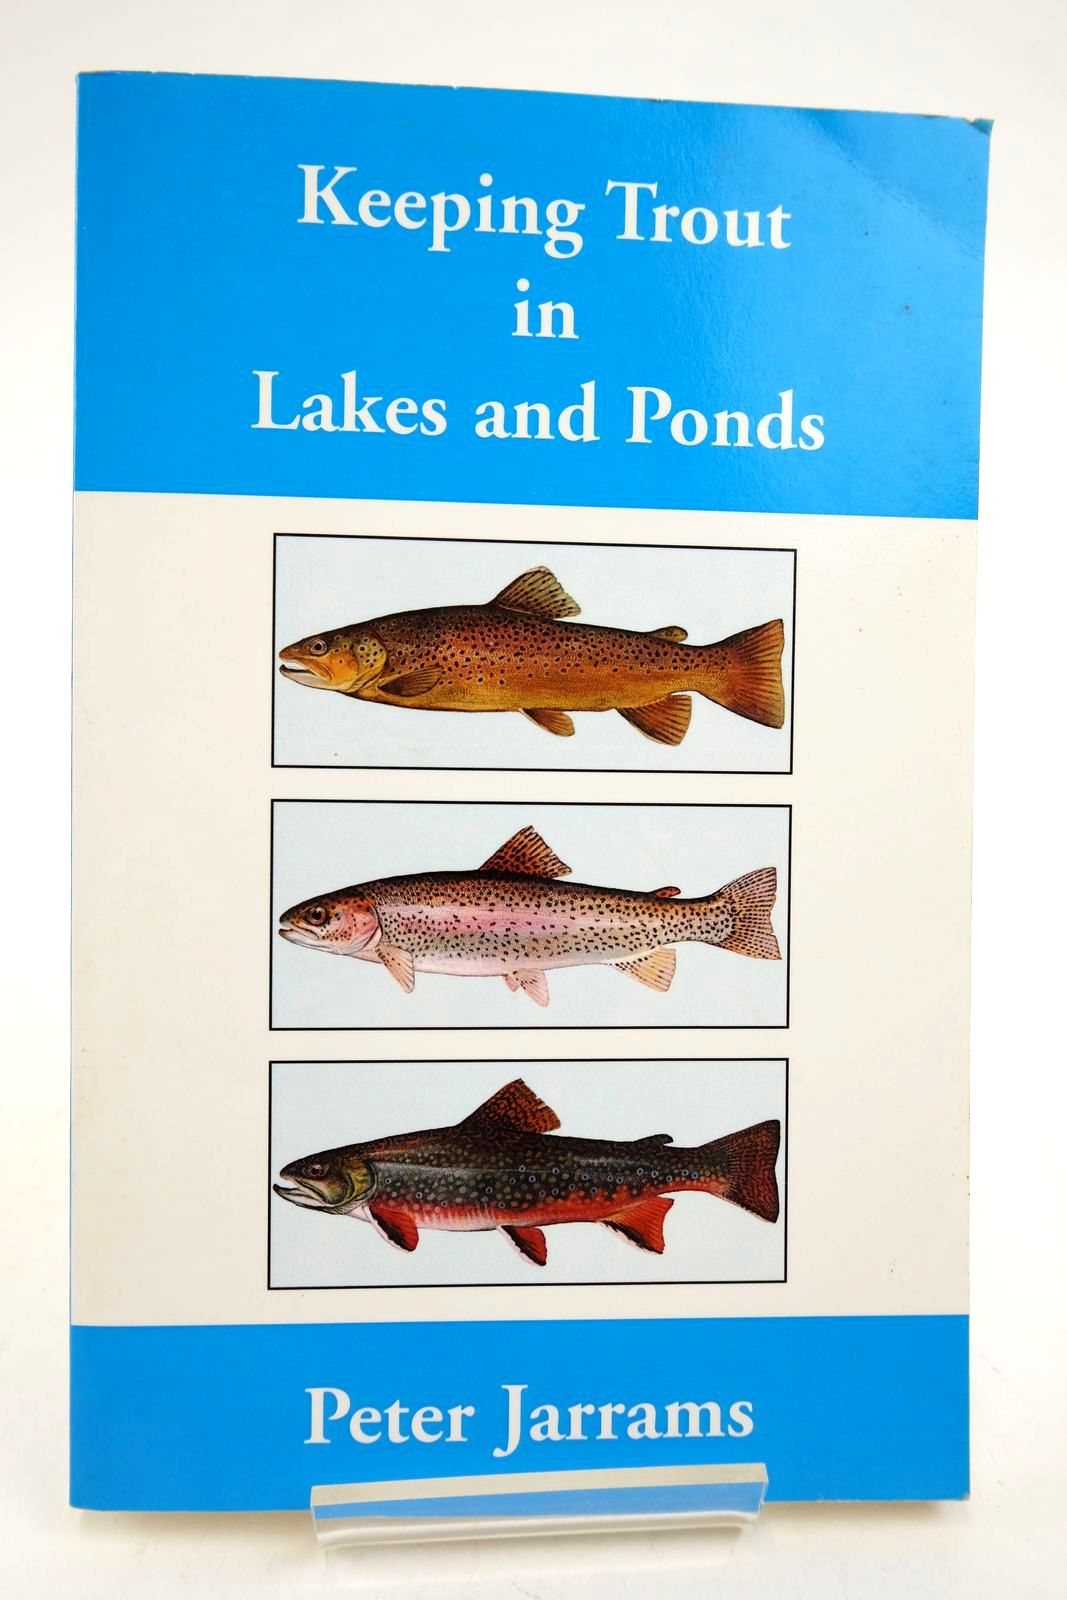 Photo of KEEPING TROUT IN LAKES AND PONDS written by Jarrams, Peter published by Upso Ltd (STOCK CODE: 2139615)  for sale by Stella & Rose's Books